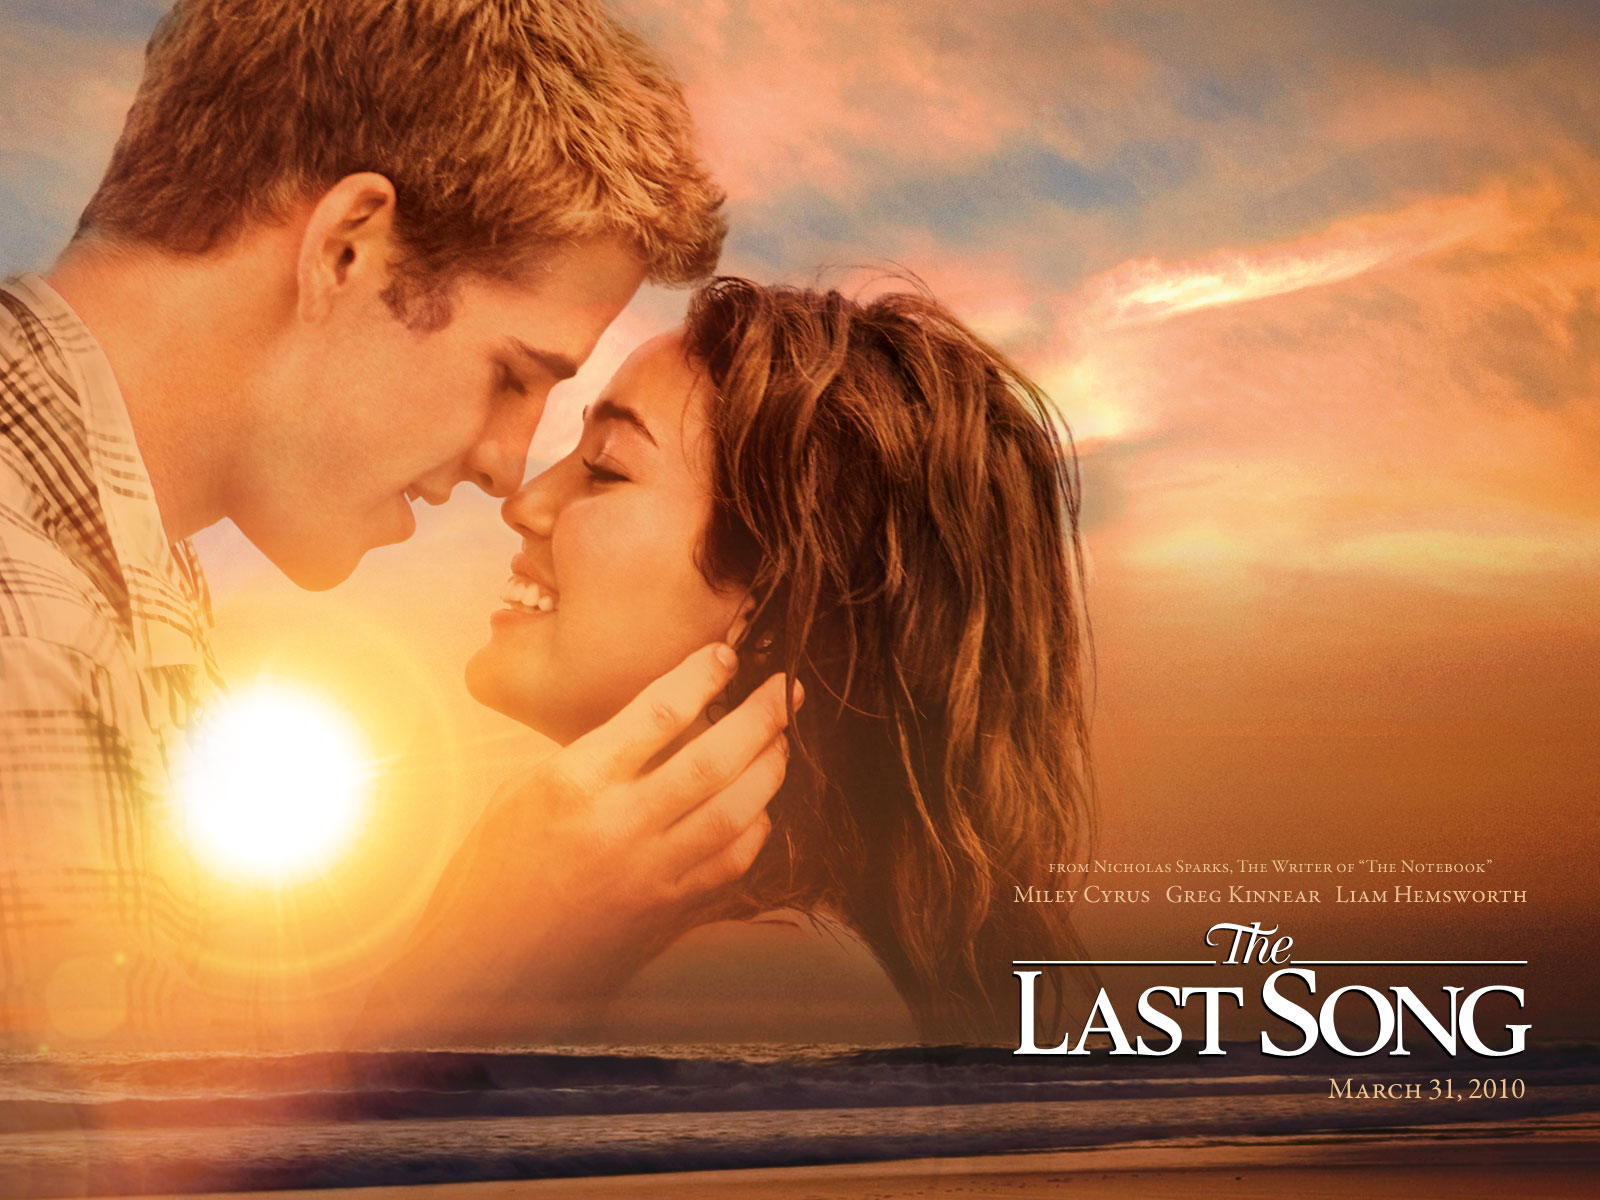 Movie The Last Song (2010) HD Wallpaper | Background Image